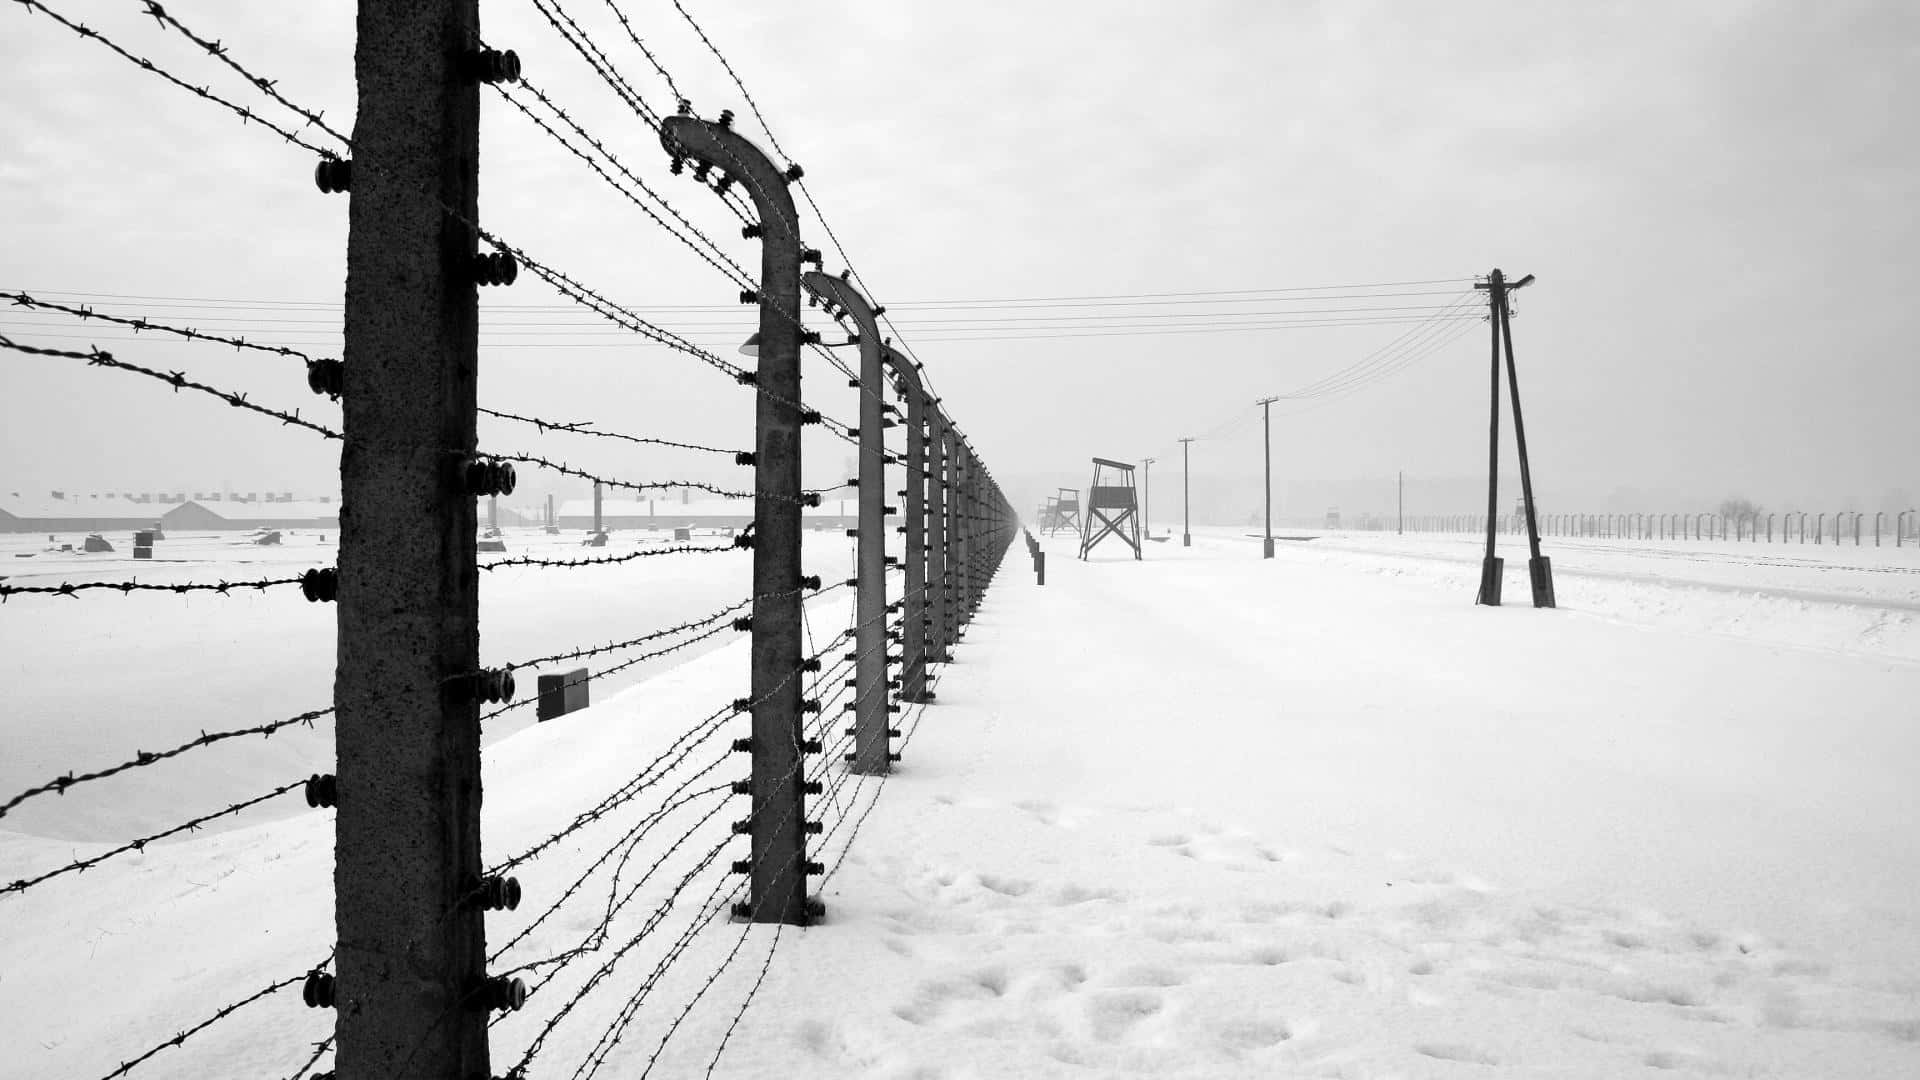 A Barbed Wire Fence In The Snow